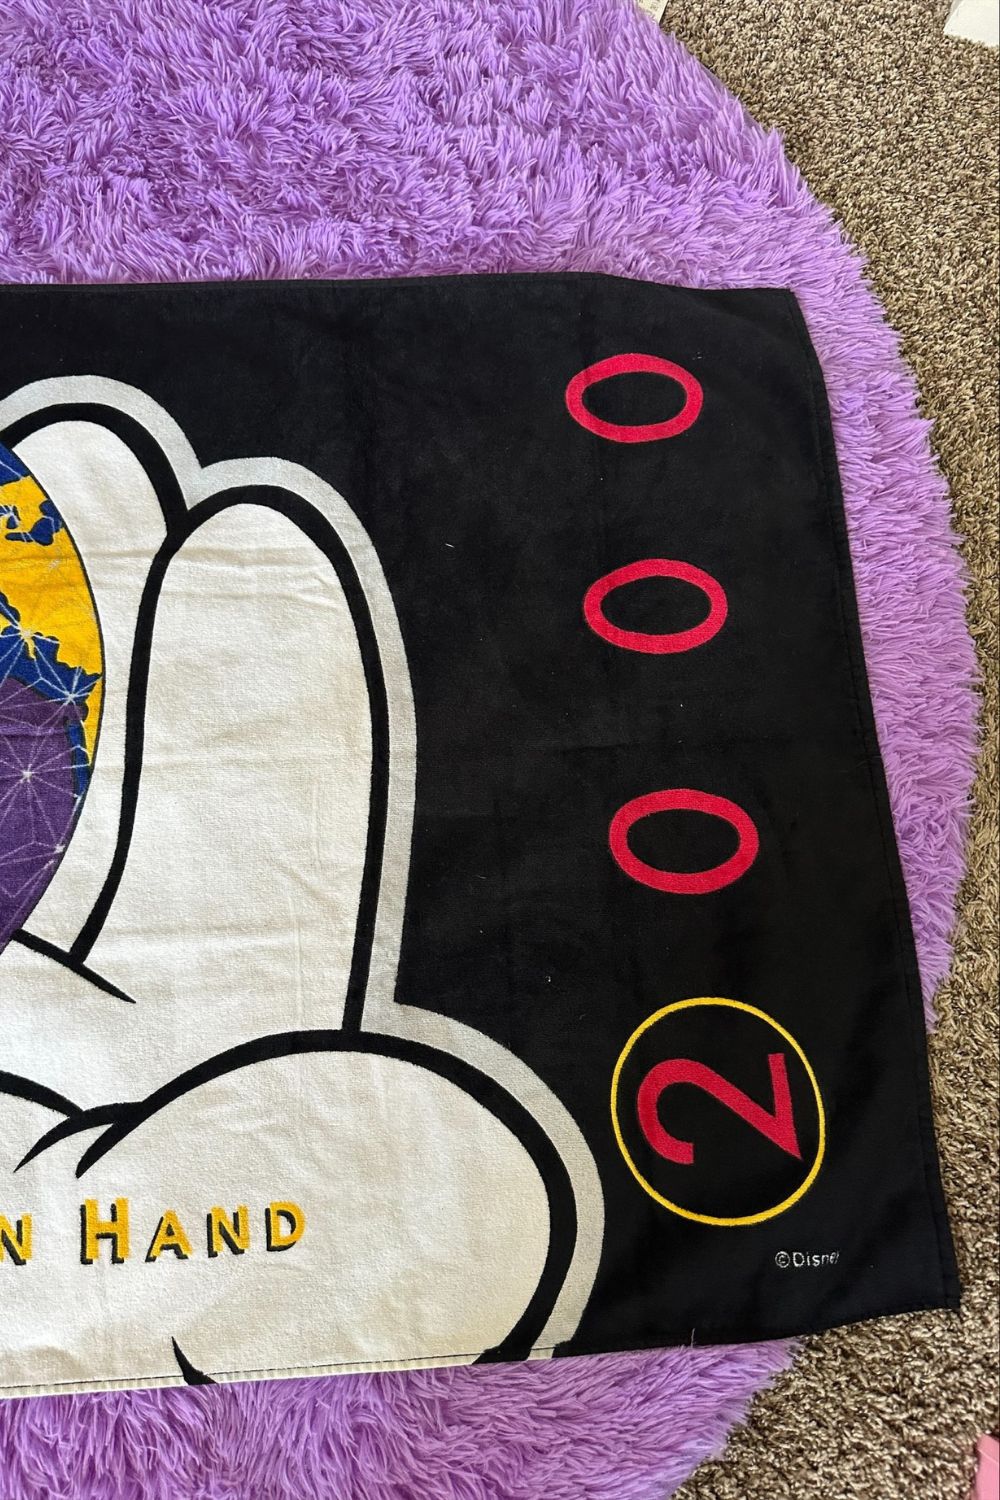 EPCOT 2000 CELEBRATE THE FUTURE HAND IN HAND TOWEL*